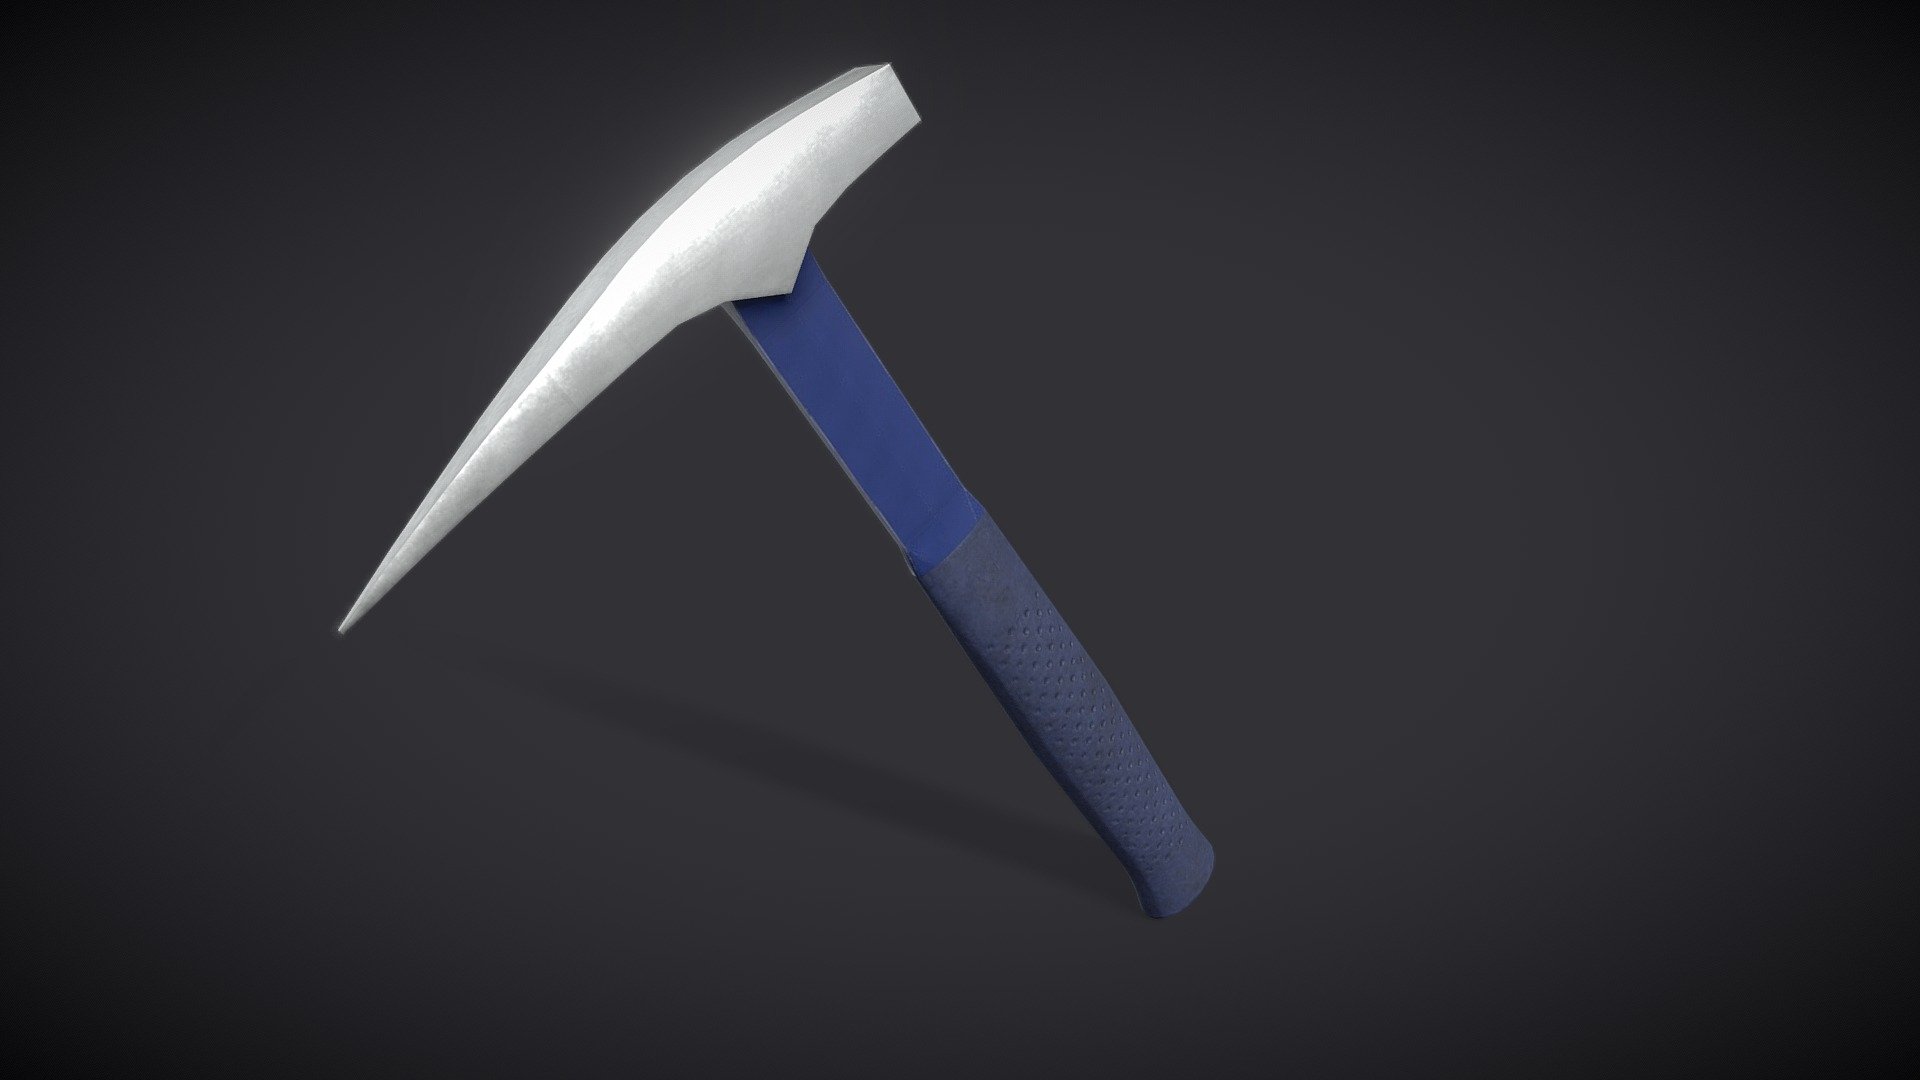 Geologist Hammer



Dimensions : 0.0266m x 0.222m x 0.368m

Texture : PBR, 1024, Metal

Files include : Textures, GLB &amp; FBX

Usage : VR, Game Ready
................

OVA’s flagship software, StellarX, allows those with no programming or coding knowledge to place 3D goods and create immersive experiences through simple drag-and-drop actions. 

Storytelling, which involves a series of interactions, sequences, and triggers are easily created through OVA’s patent-pending visual scripting tool. 

................

**Download StellarX on the Meta Quest Store: oculus.com/experiences/quest/8132958546745663
**

**Download StellarX on Steam: store.steampowered.com/app/1214640/StellarX
**

Have a bigger immersive project in mind? Get in touch with us! 



StellarX on LinkedIn: linkedin.com/showcase/stellarx-by-ova

Join the StellarX Discord server! 

...........

StellarX© 2022 - Underground Mine | Geologist Hammer - Buy Royalty Free 3D model by StellarX 3d model